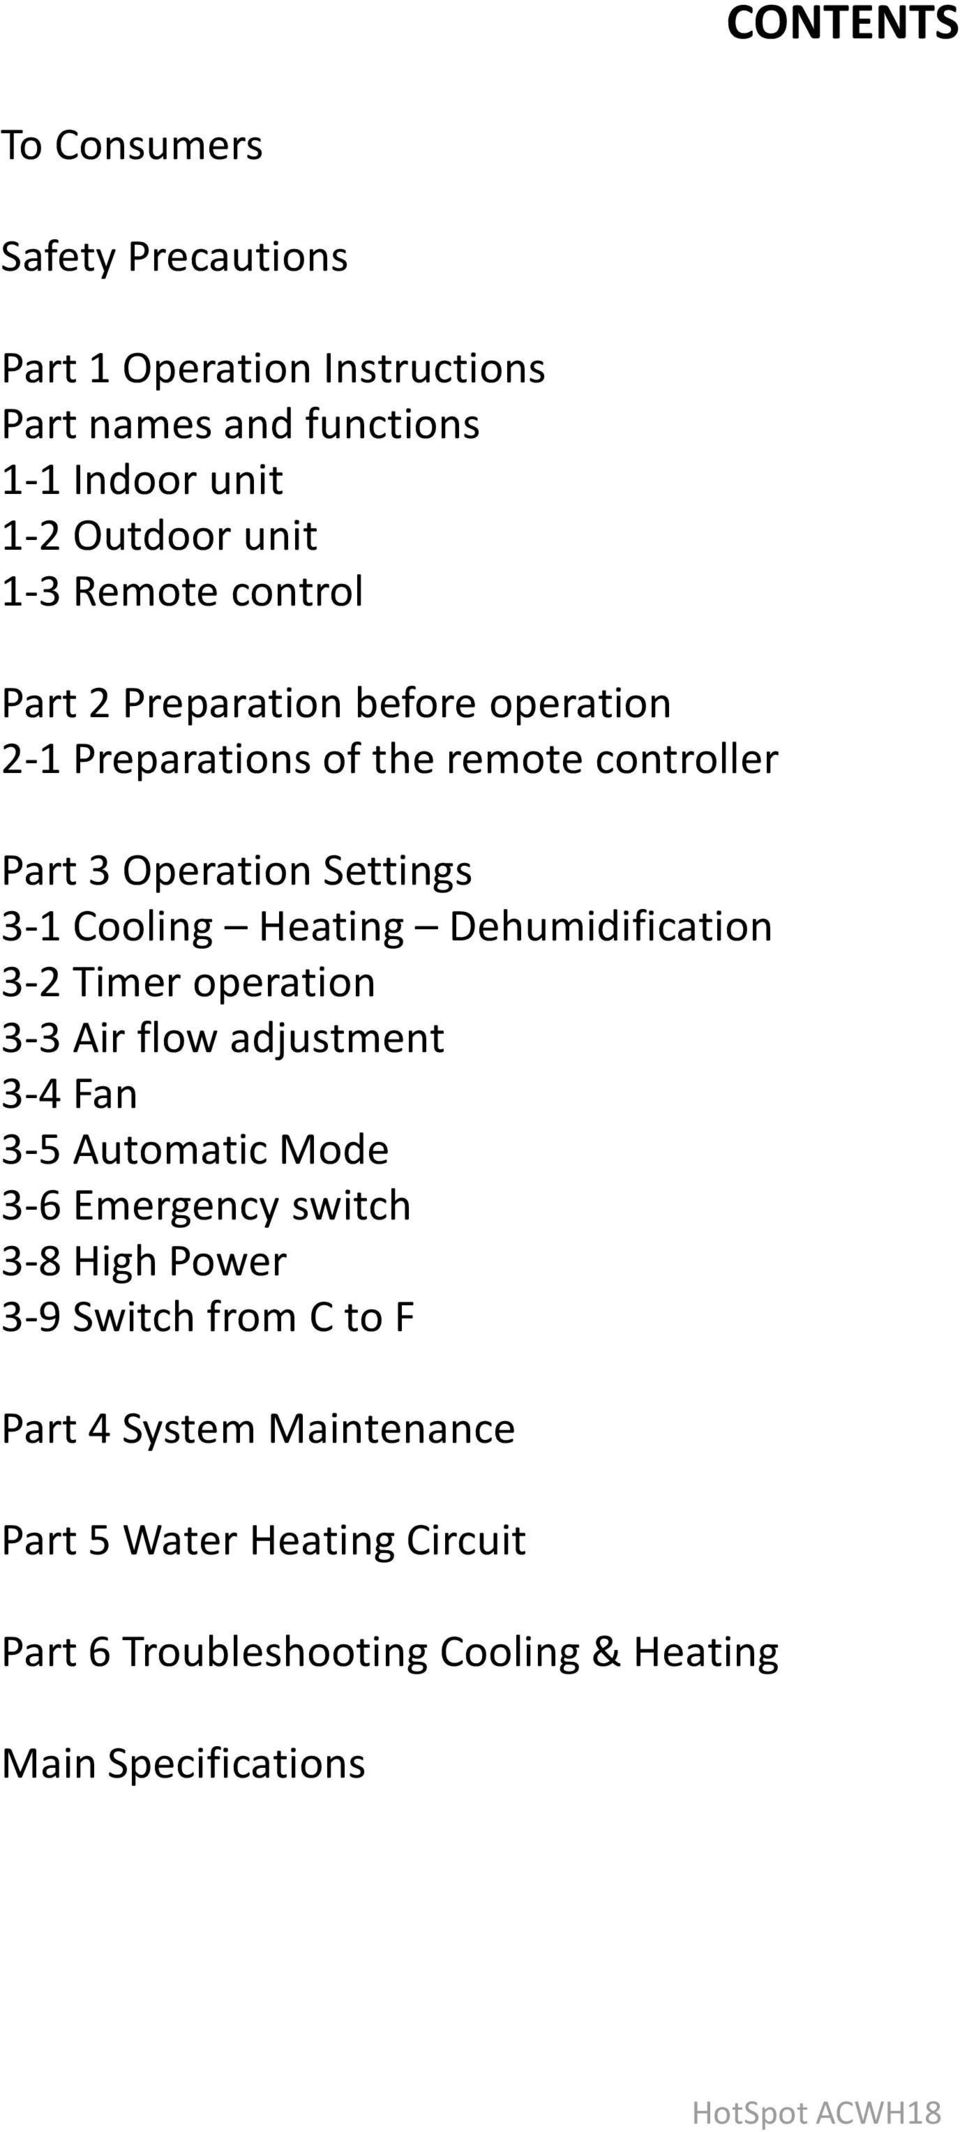 Heating Dehumidification 3-2 Timer operation 3-3 Air flow adjustment 3-4 Fan 3-5 Automatic Mode 3-6 Emergency switch 3-8 High Power